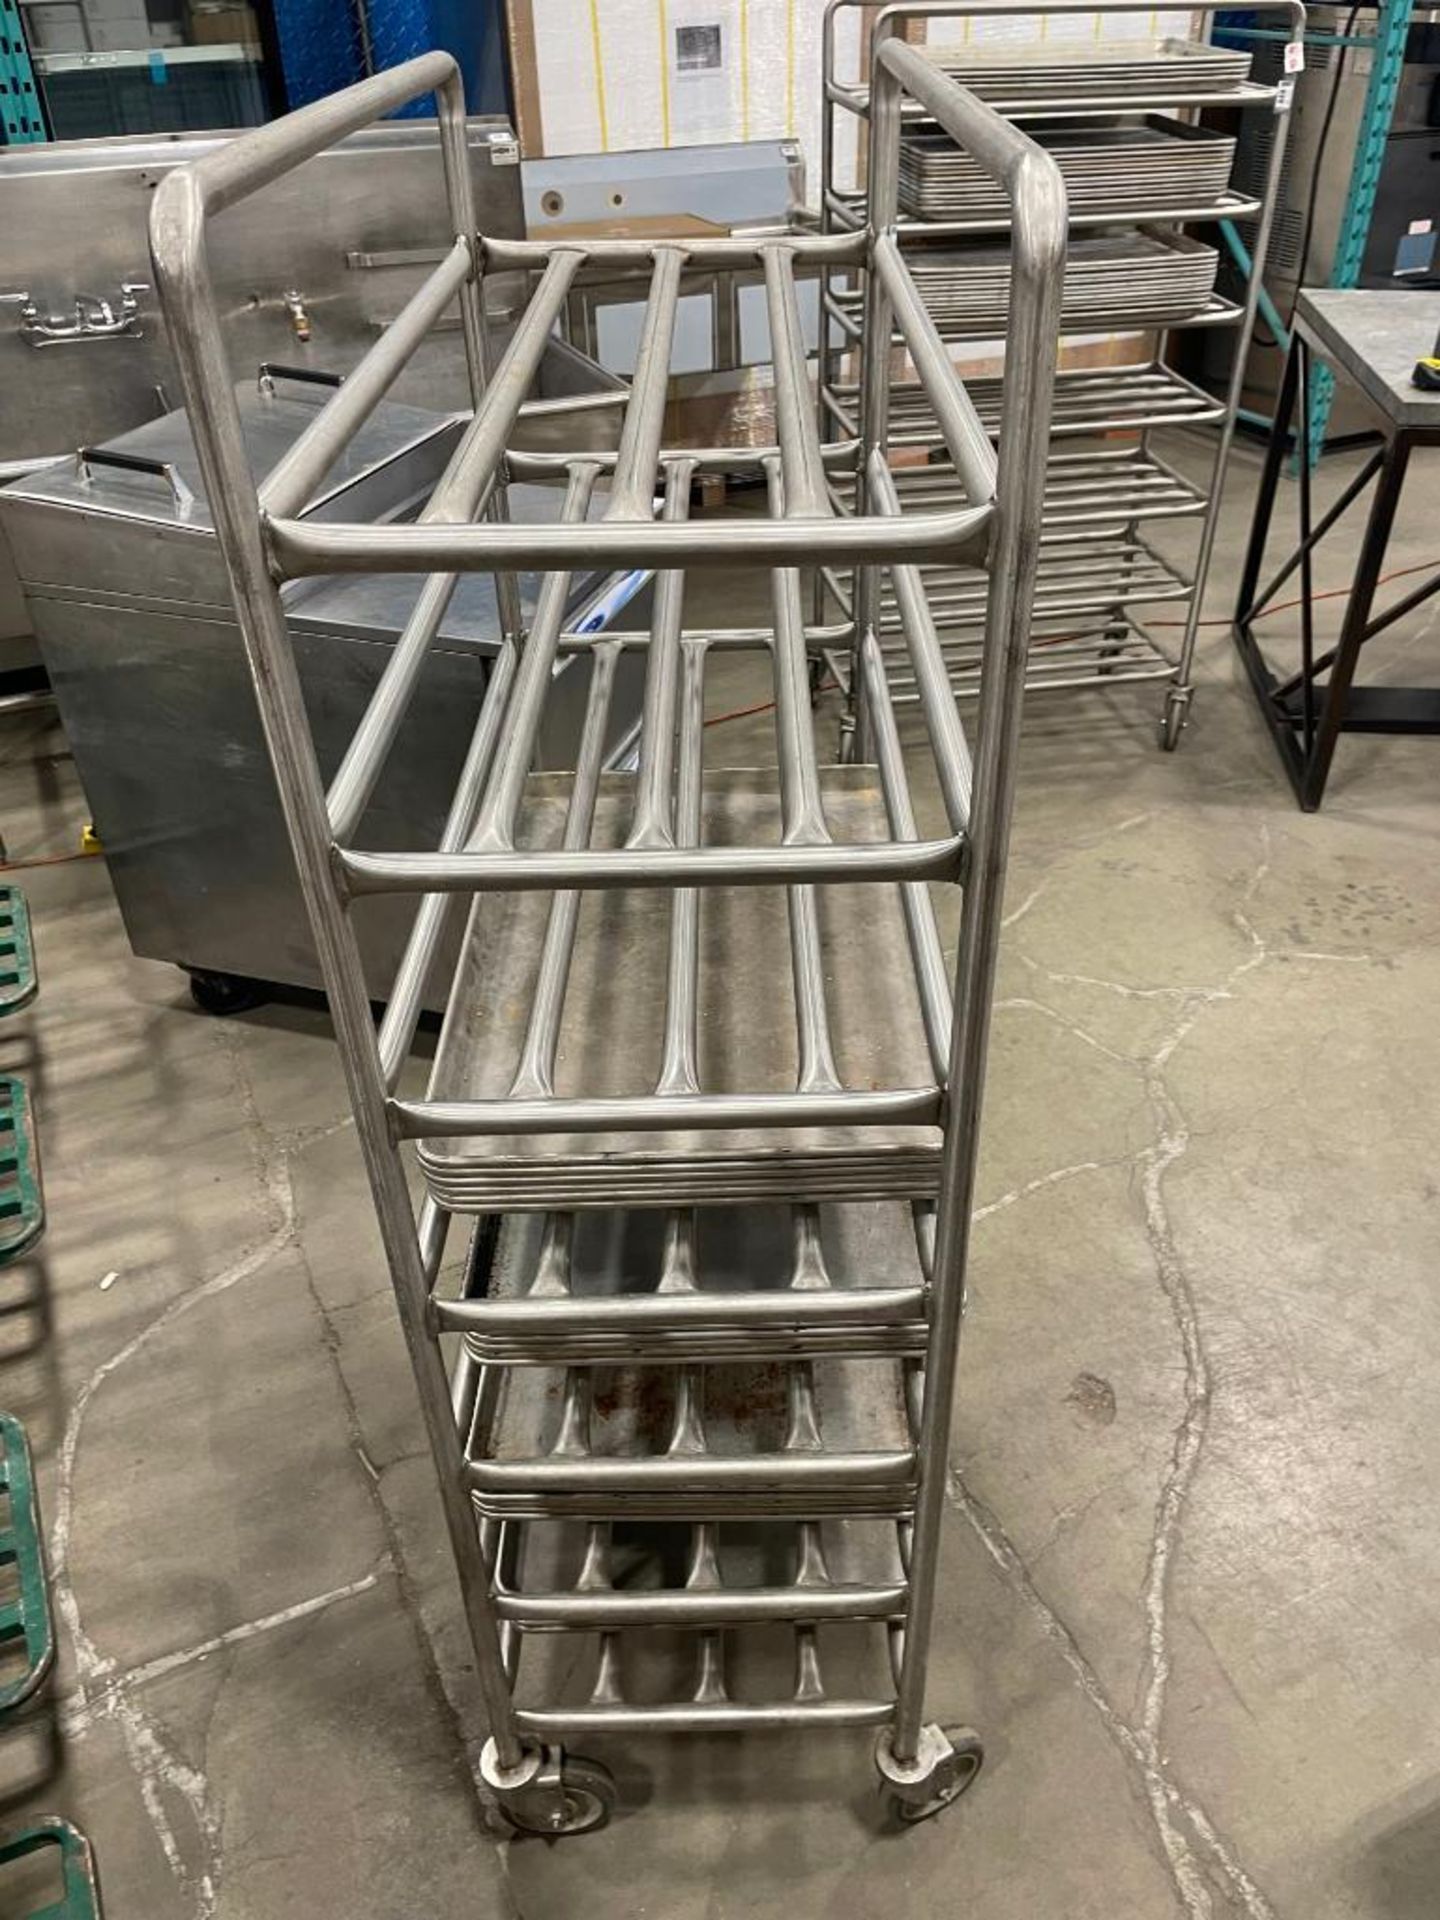 7 TIER STAINLESS STEEL MOBILE PLATTER CART WITH (24) FULL SIZE BUN PANS - Image 6 of 6